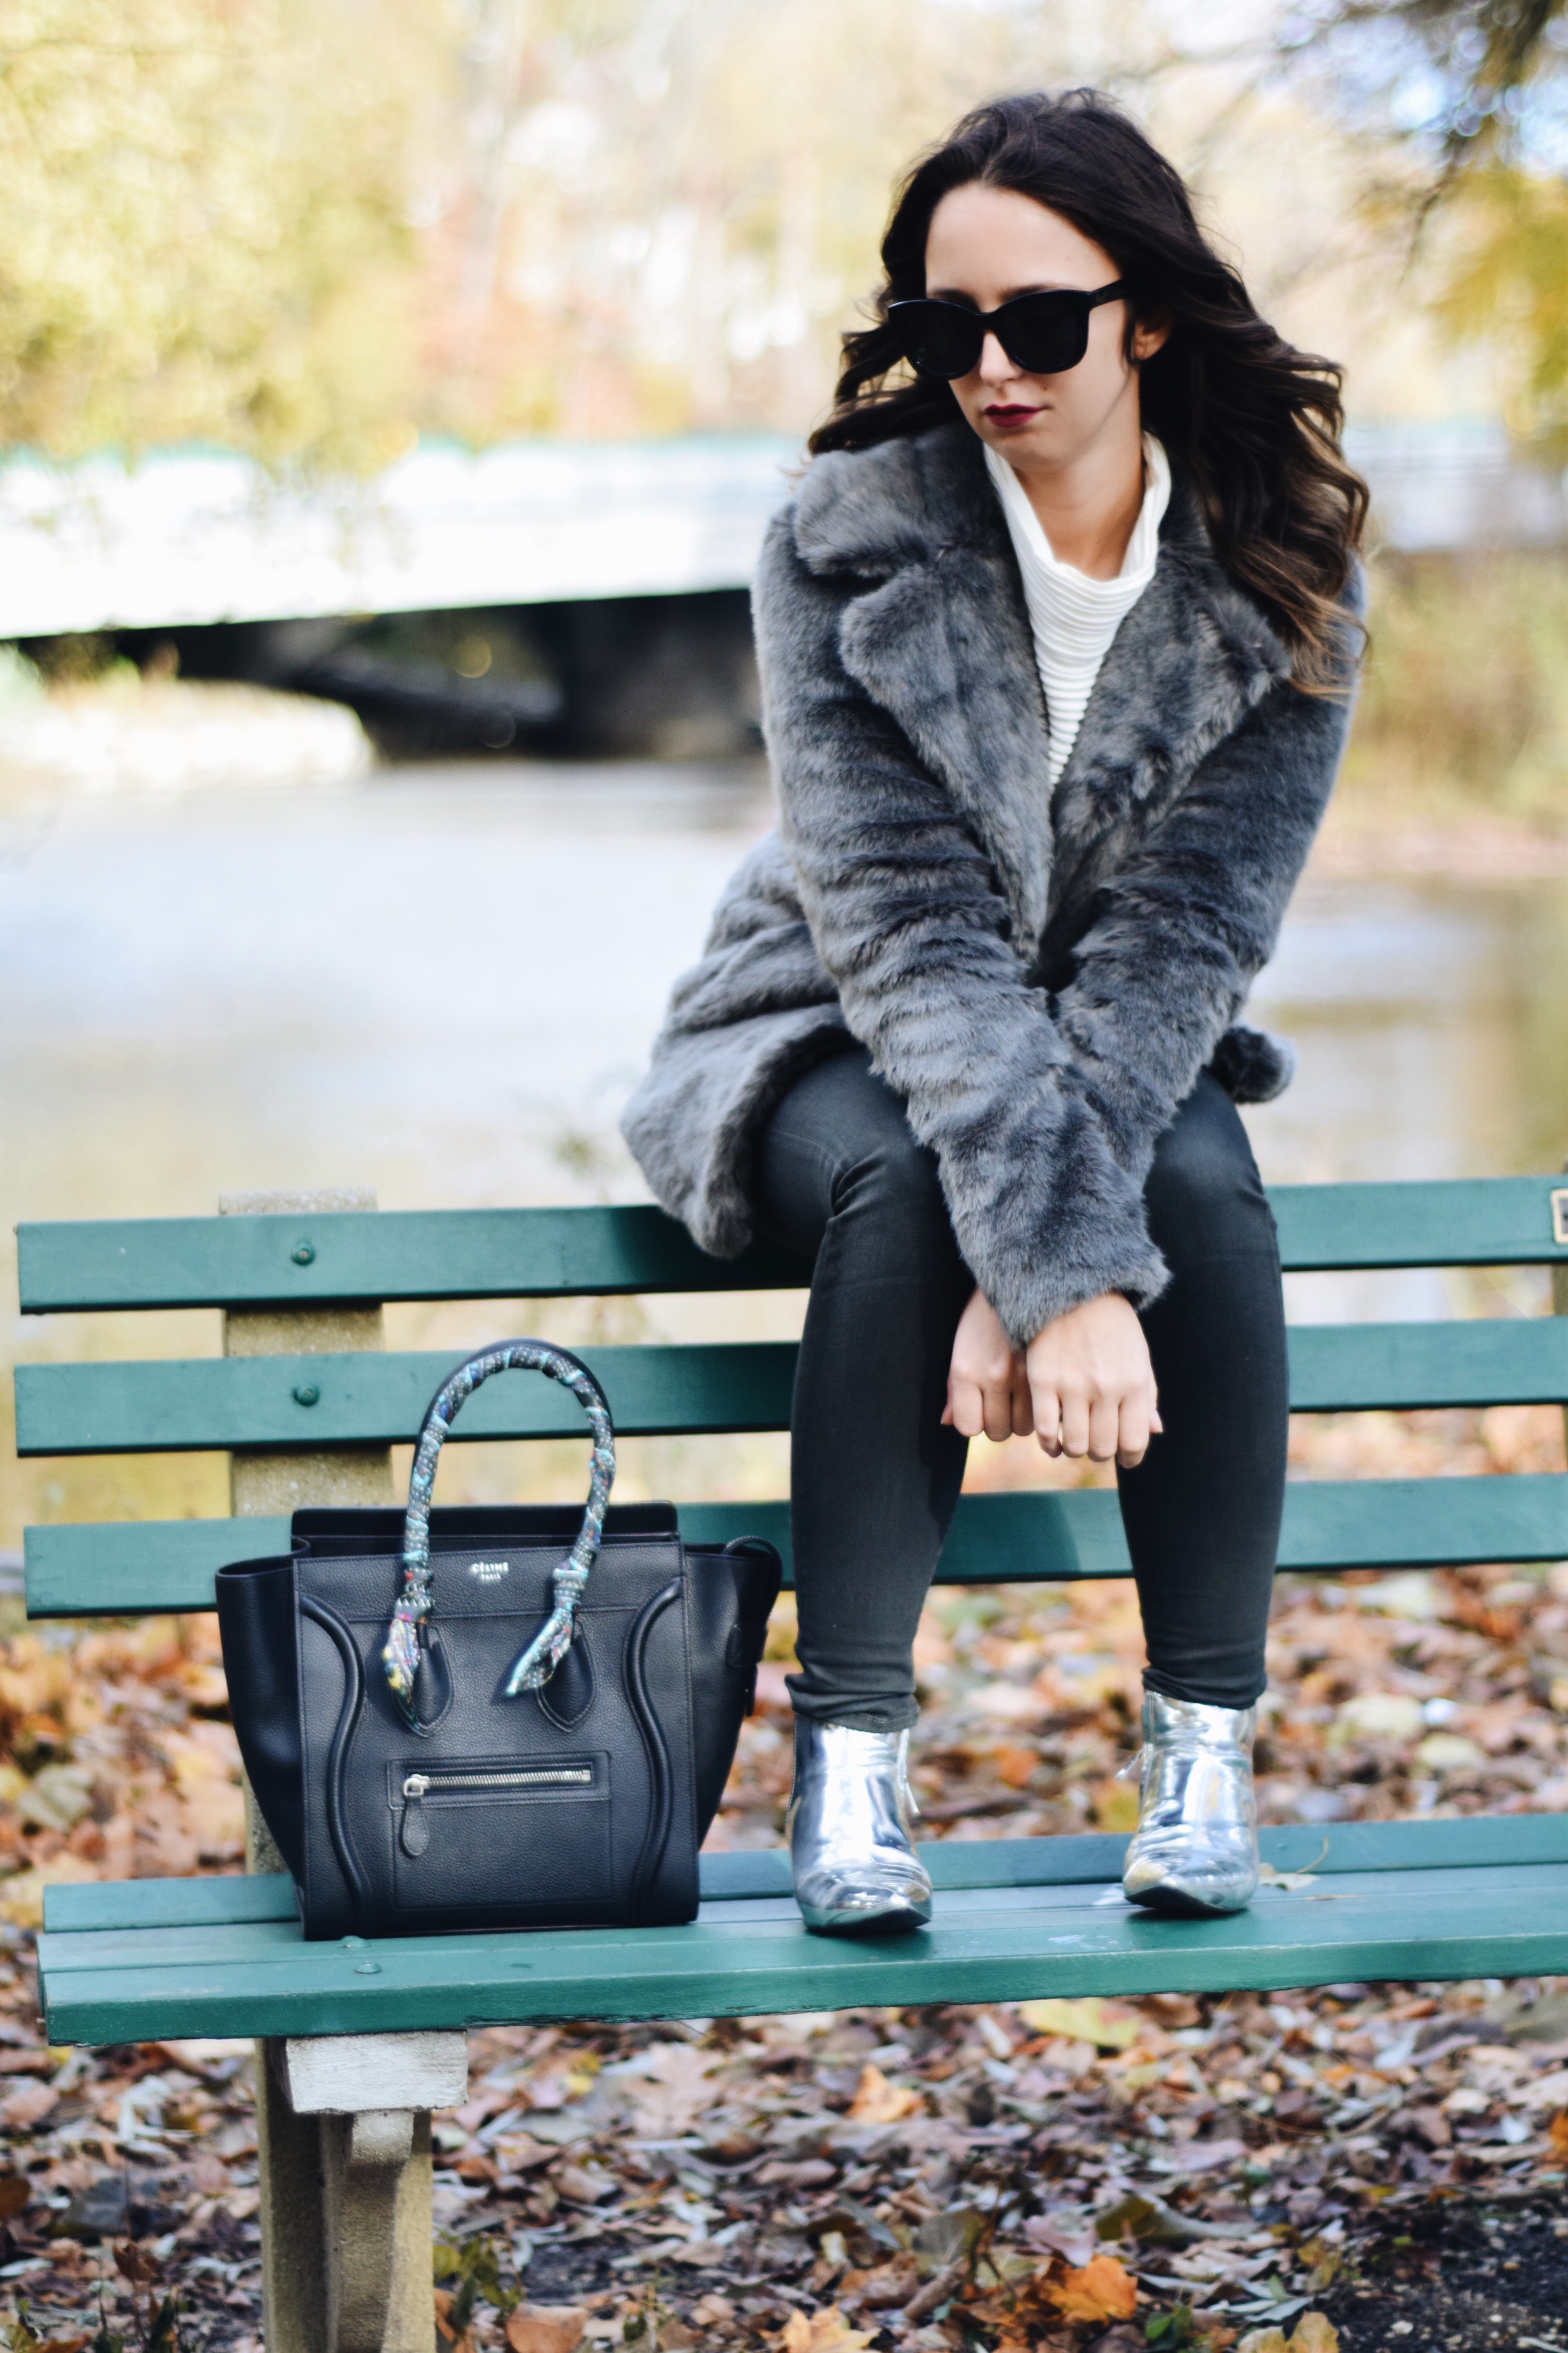 Style-faux fur coat-unreal fur-outfit-ny-Street style-blogger-silver booties